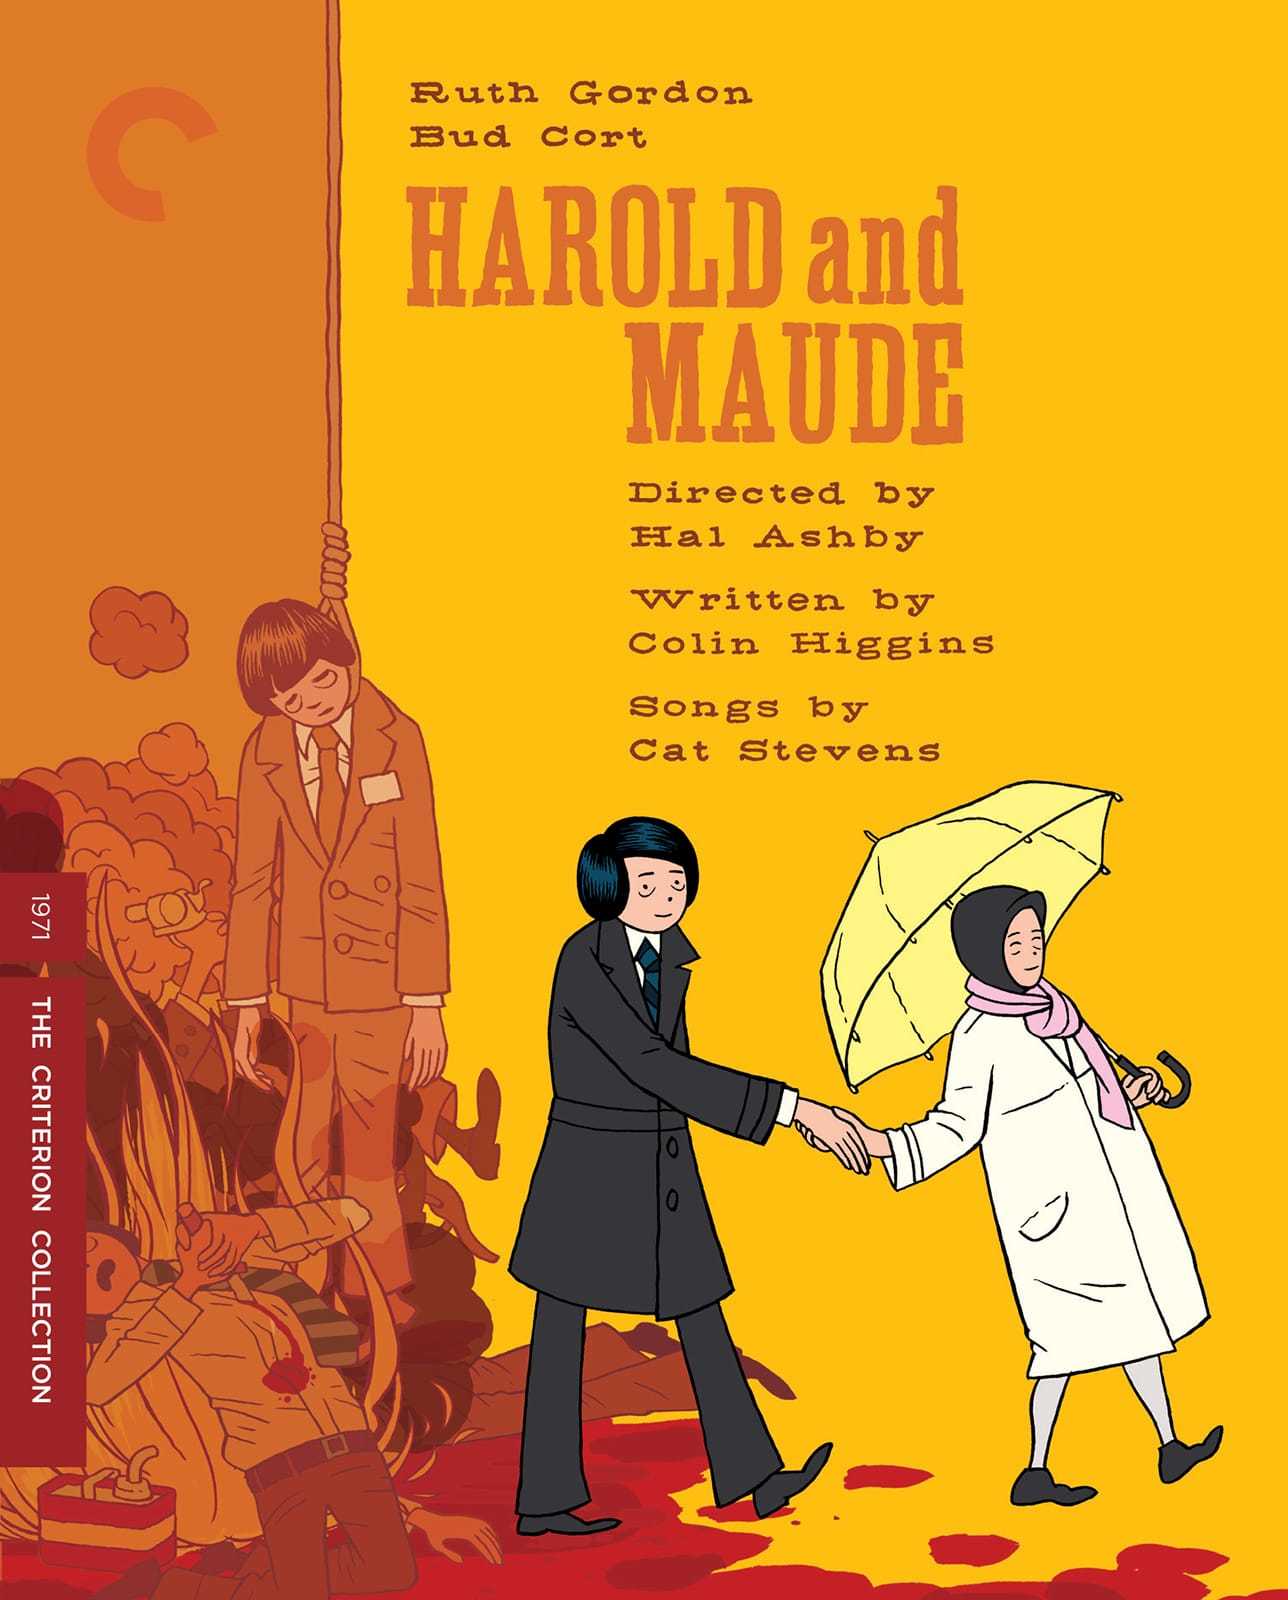 Harold and maude criterion dvd cover stock